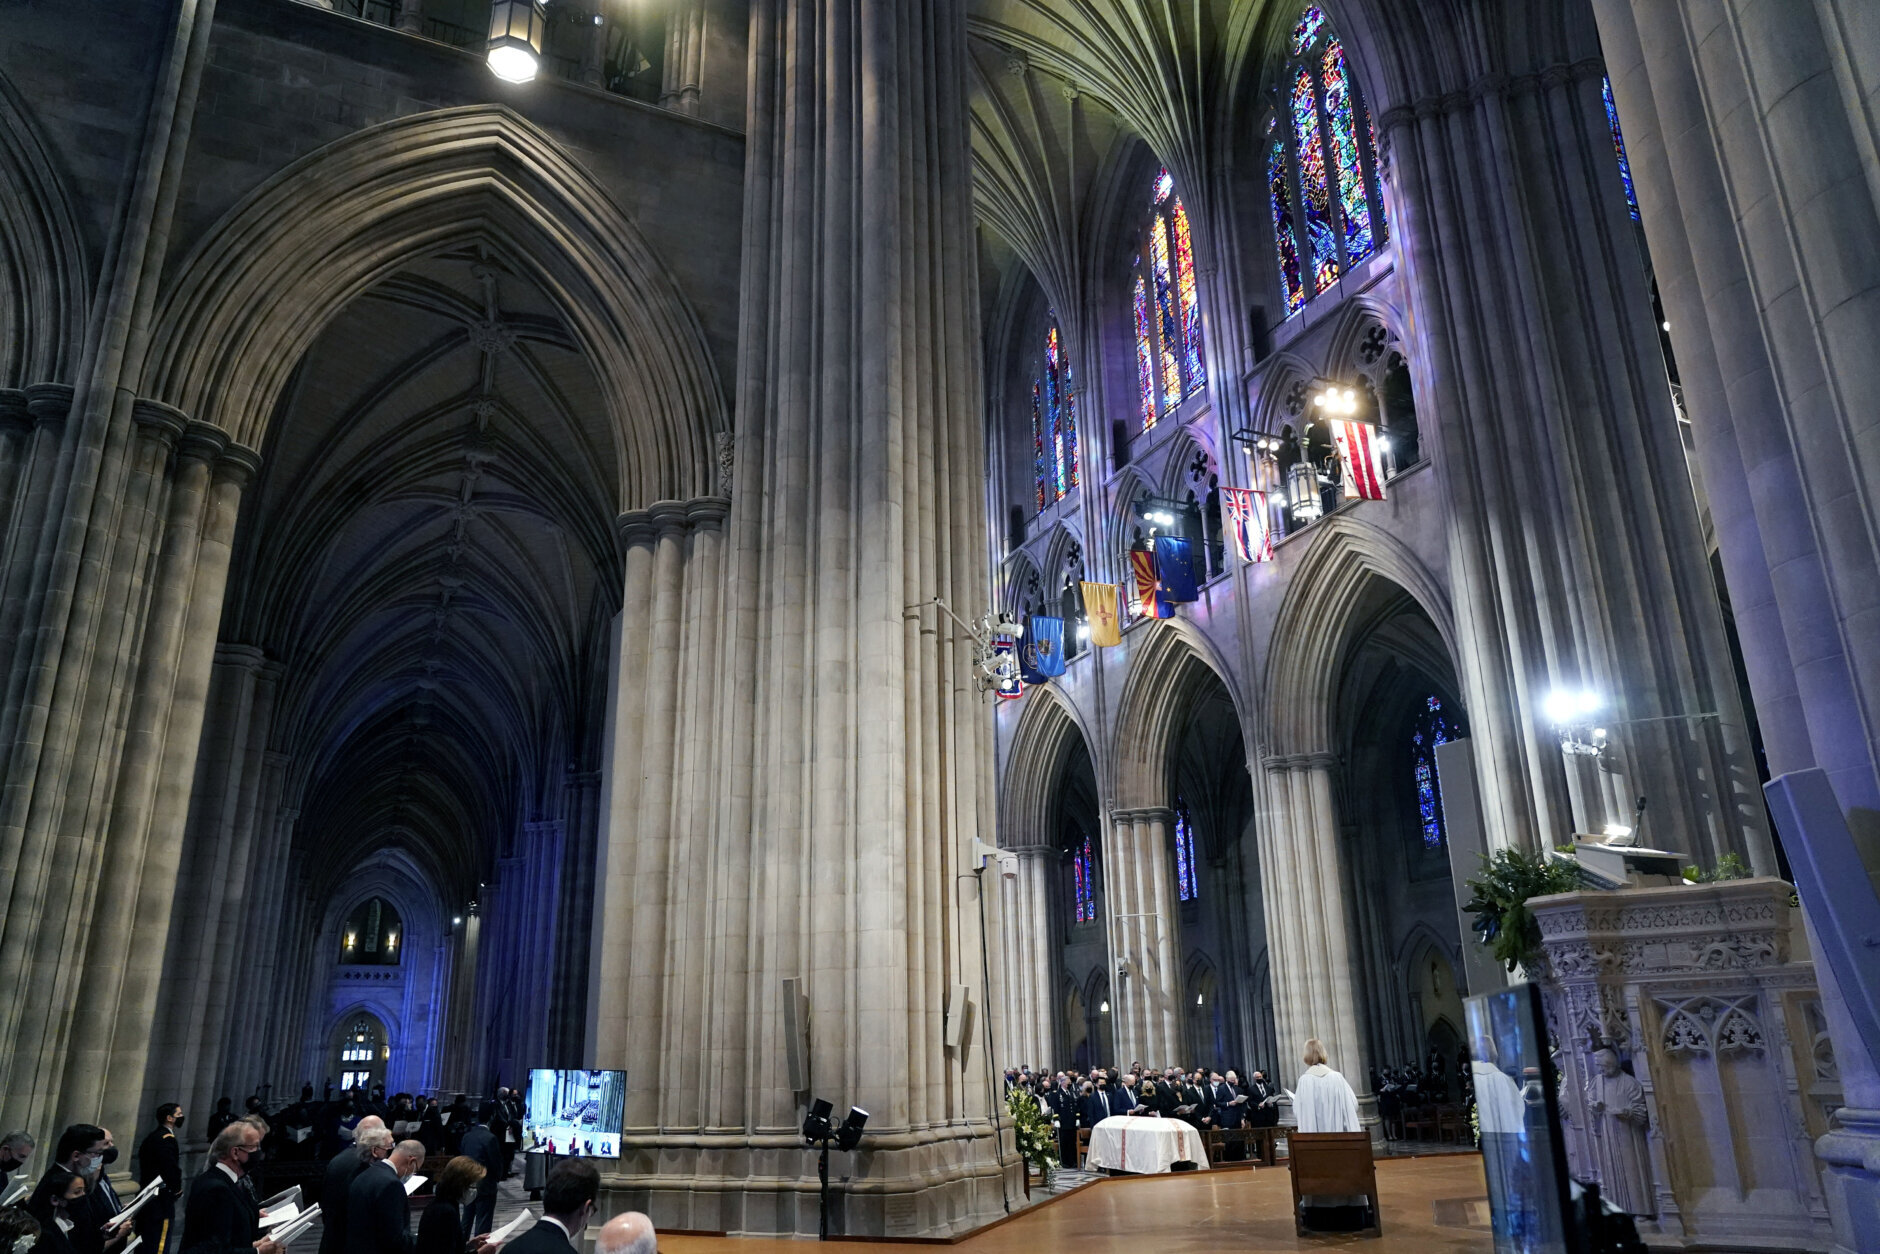 People attend the funeral service of former Sen. Bob Dole of Kansas, at the Washington National Cathedral, Friday, Dec. 10, 2021, in Washington. (AP Photo/Jacquelyn Martin)